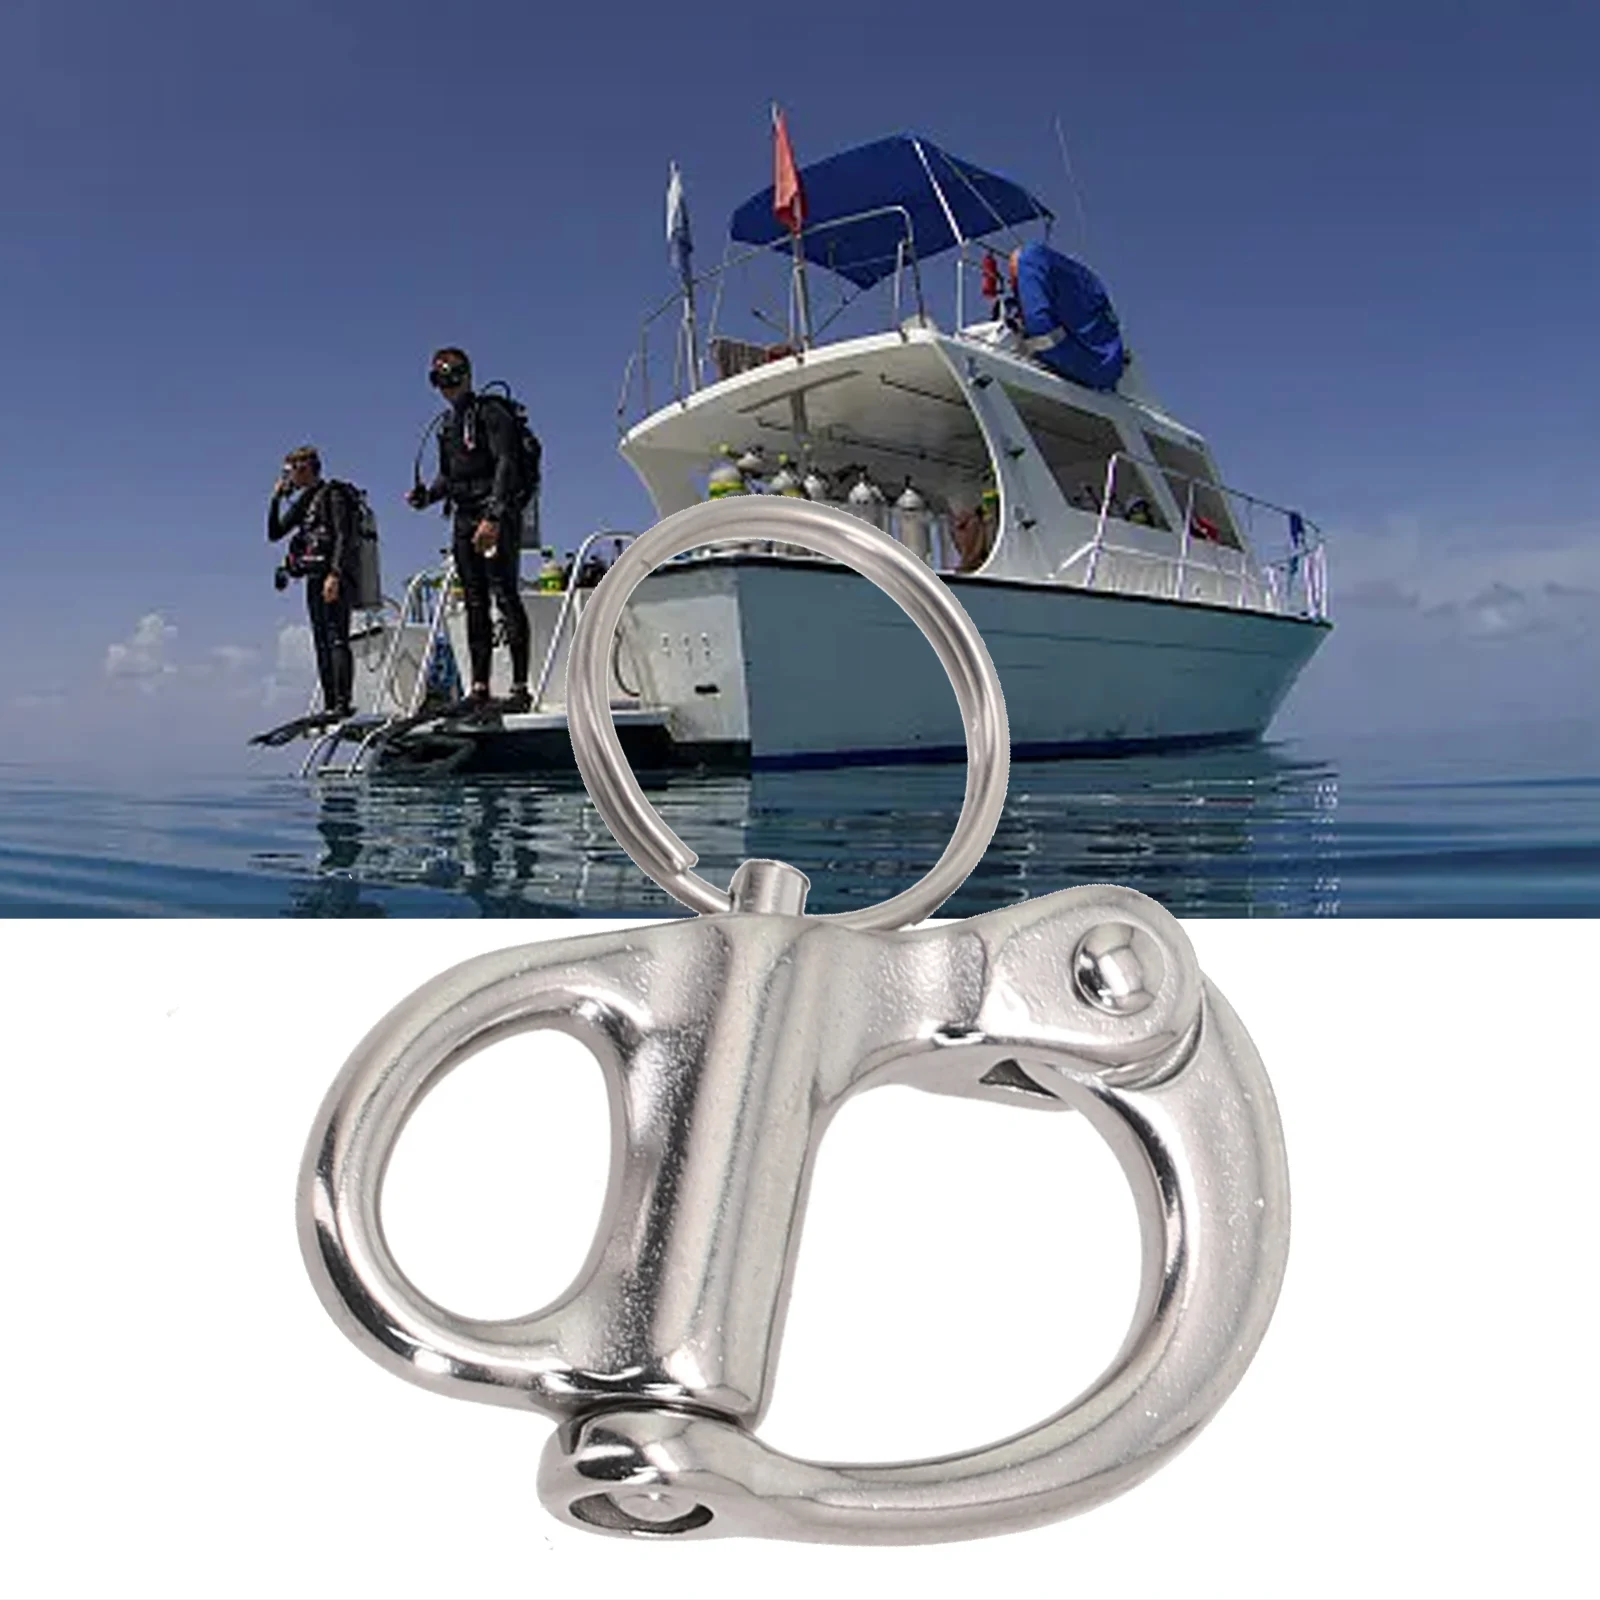 1PCS 35/52/69/96MM Quick Release Boat Anchor Chain Eye Shackle Swivel Hook Snap Marine Tools 316/304 Stainless Steel Accessory 30pcs 13mm bags strap buckles metal lobster clasp for handbag keychain swivel trigger clips snap hook diy bag parts accessory